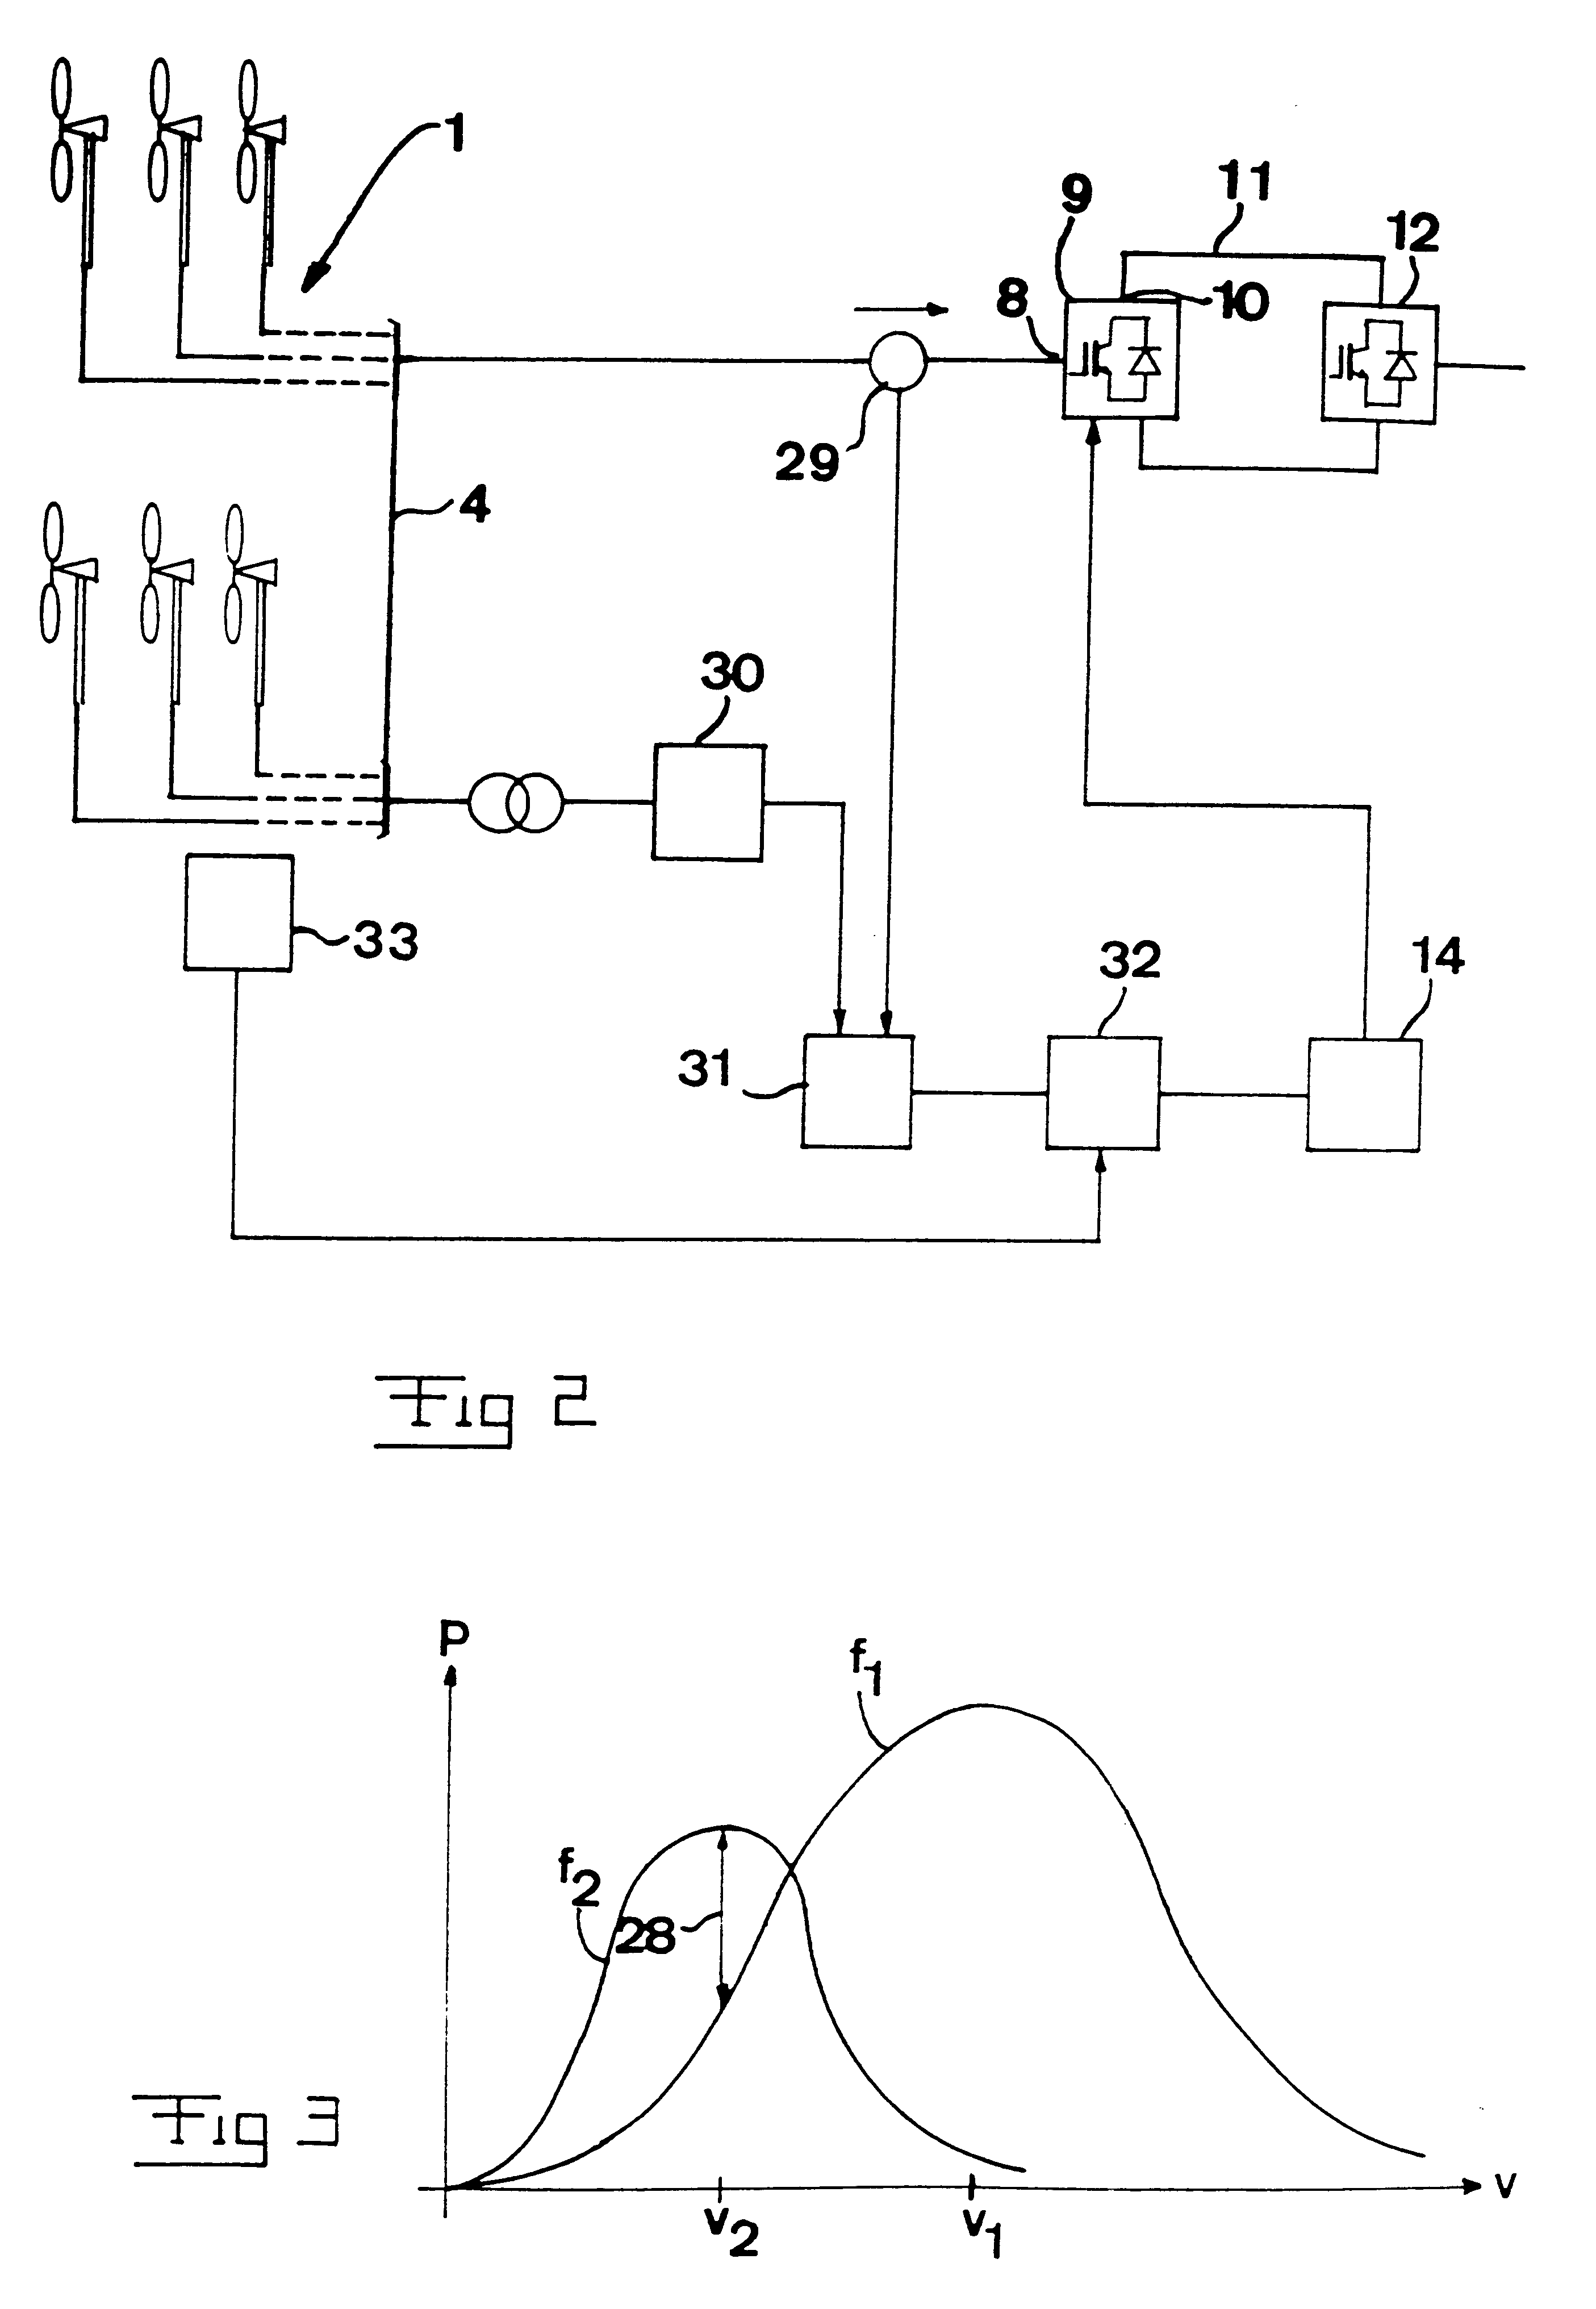 Plant for generating electric power and a method for operation of such a plant